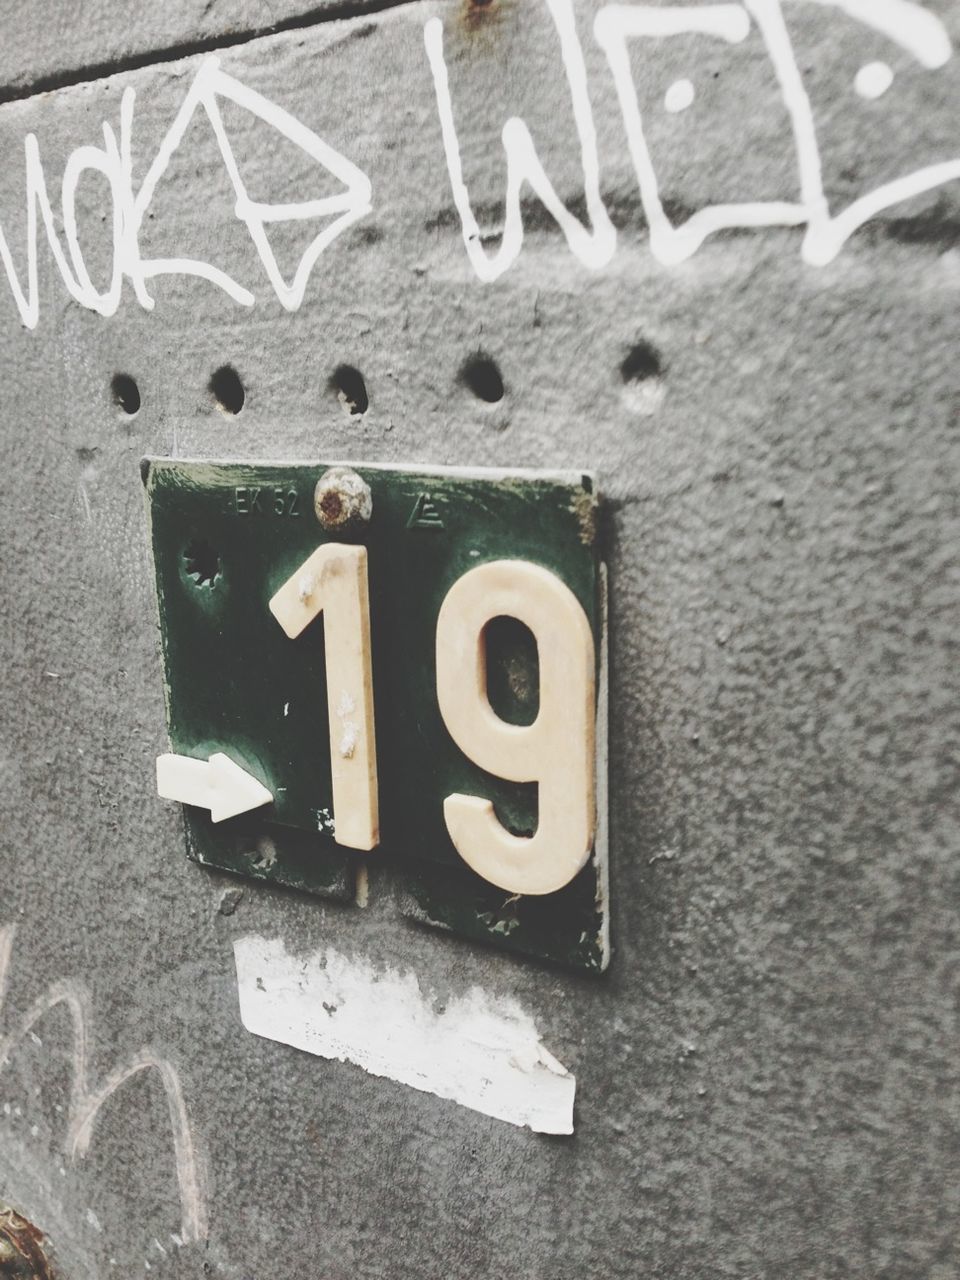 Close-up of number plate on wall